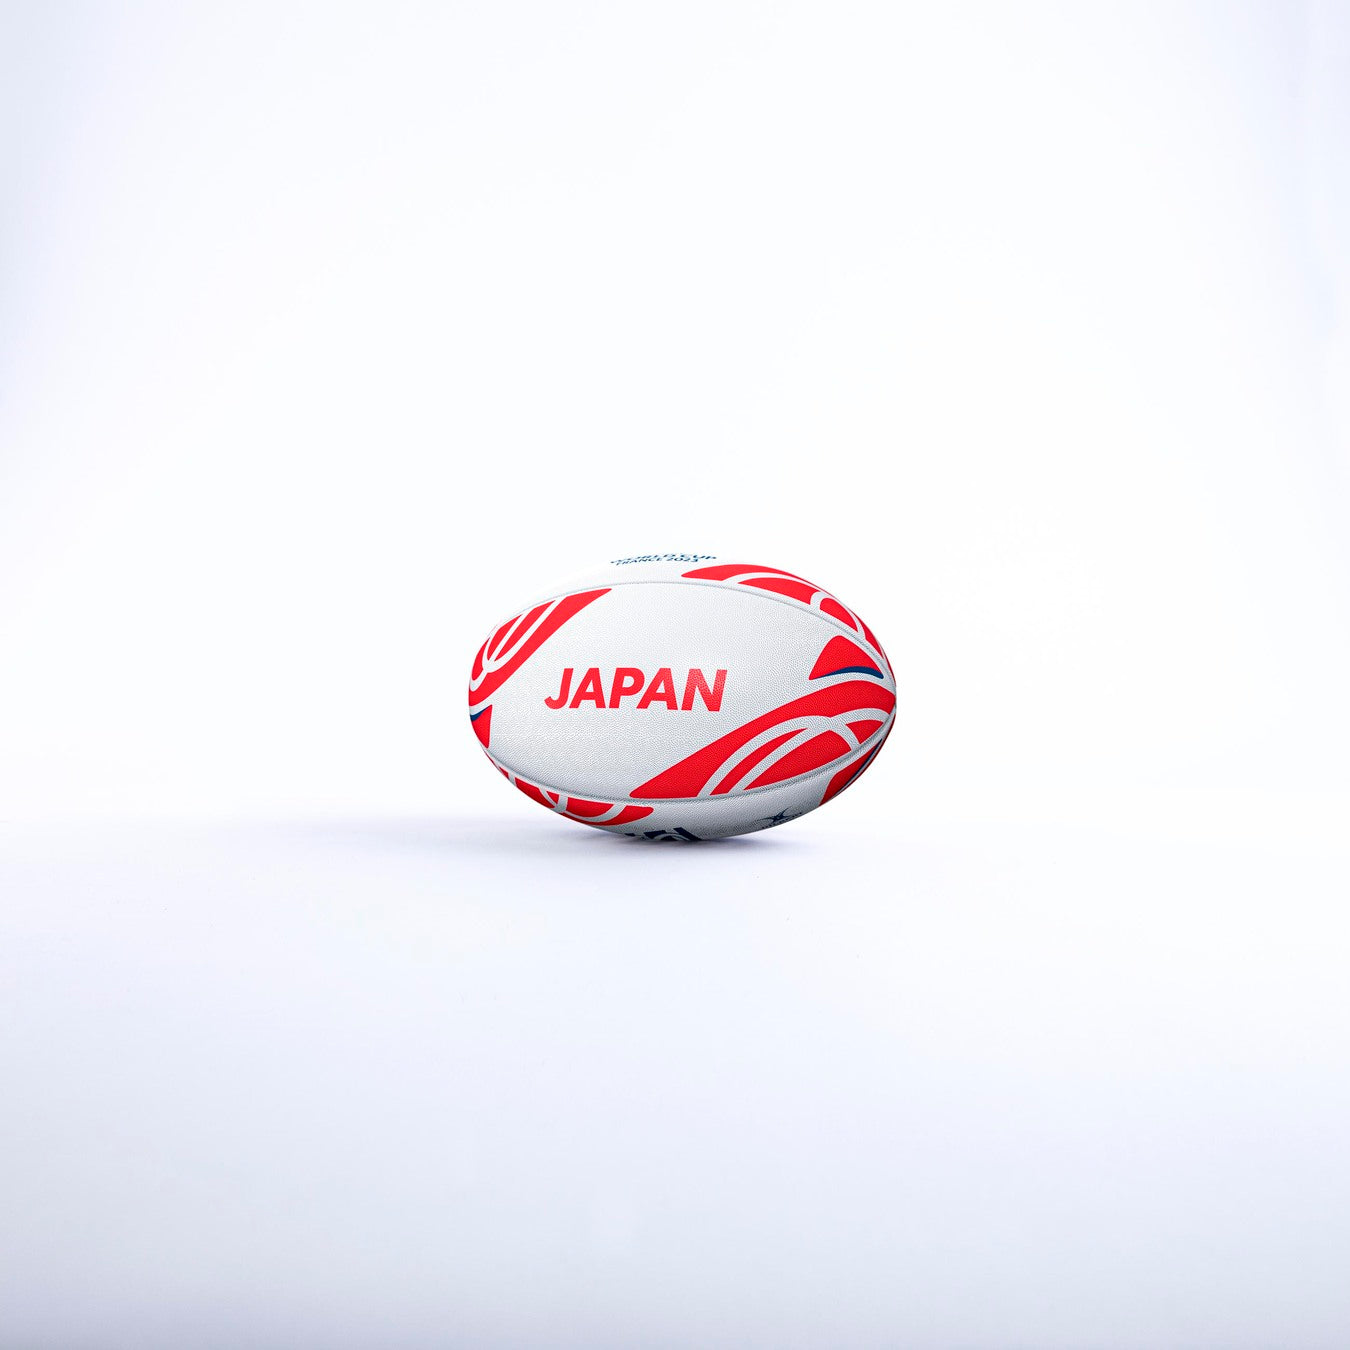 RRDF22Rugby World Cup RWC2023 Japan Supporter Ball Size 5 Main